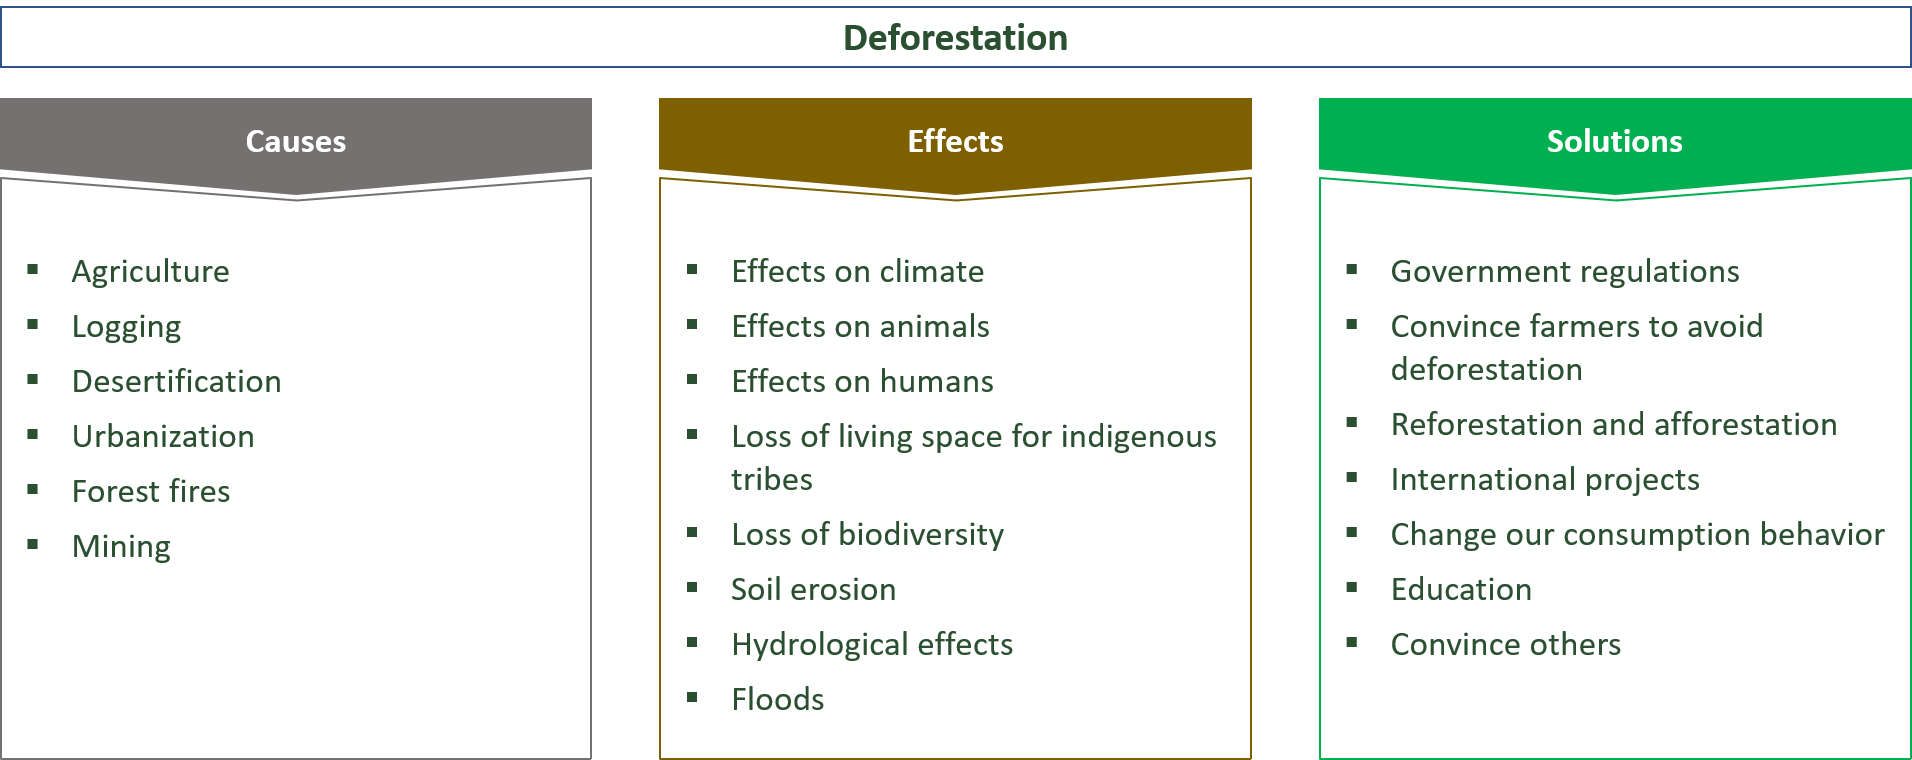 causes, effects and solutions for deforestation